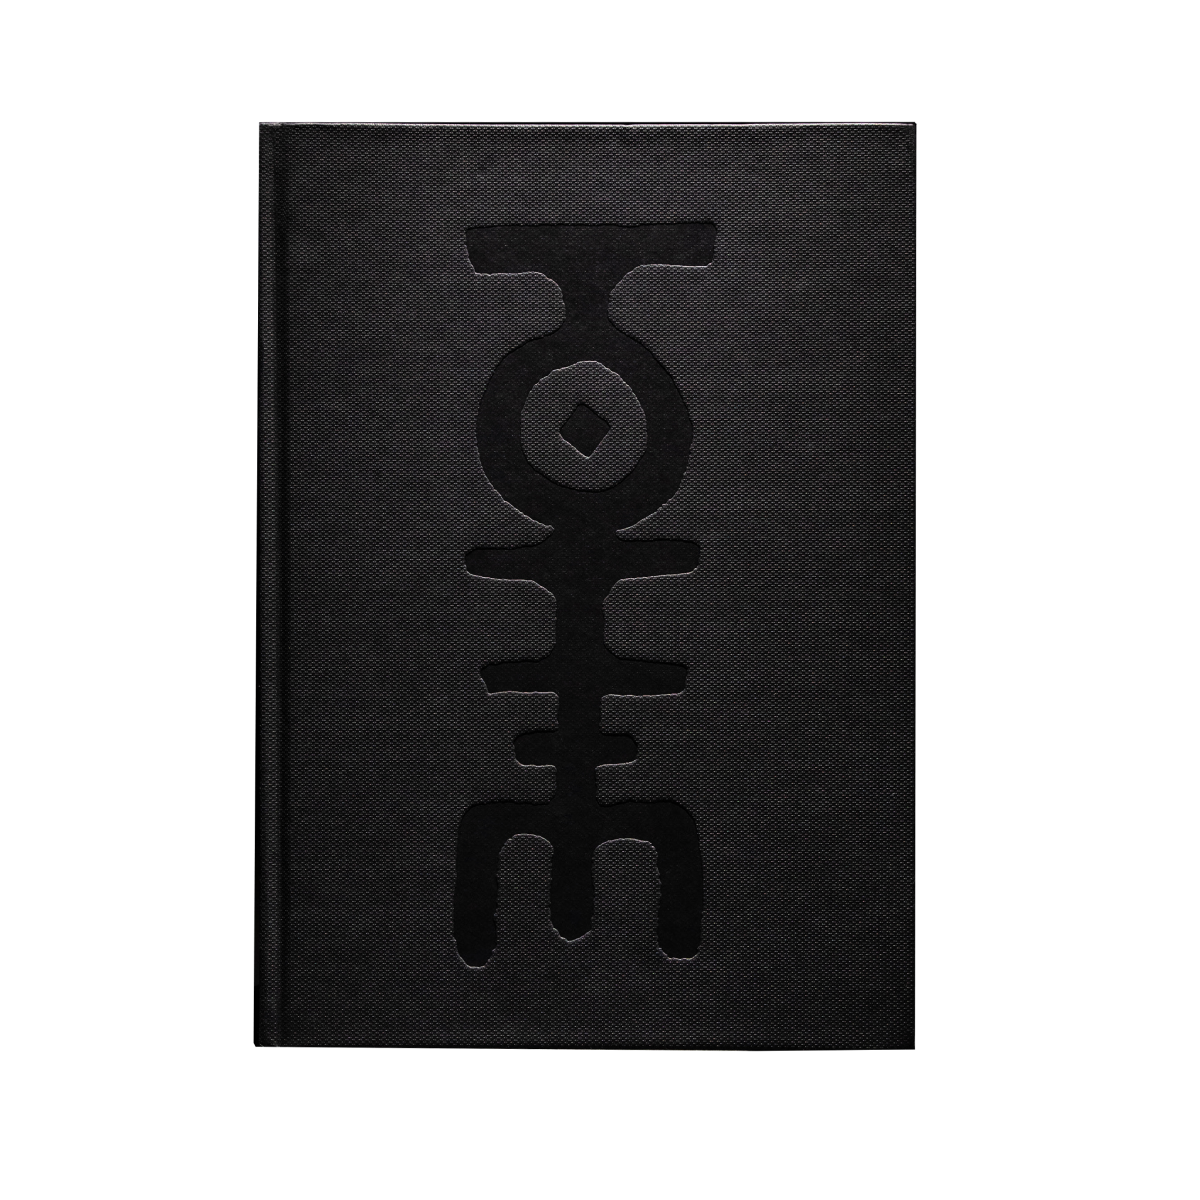 A black limited edition book from the OFFF festival in Barcelona